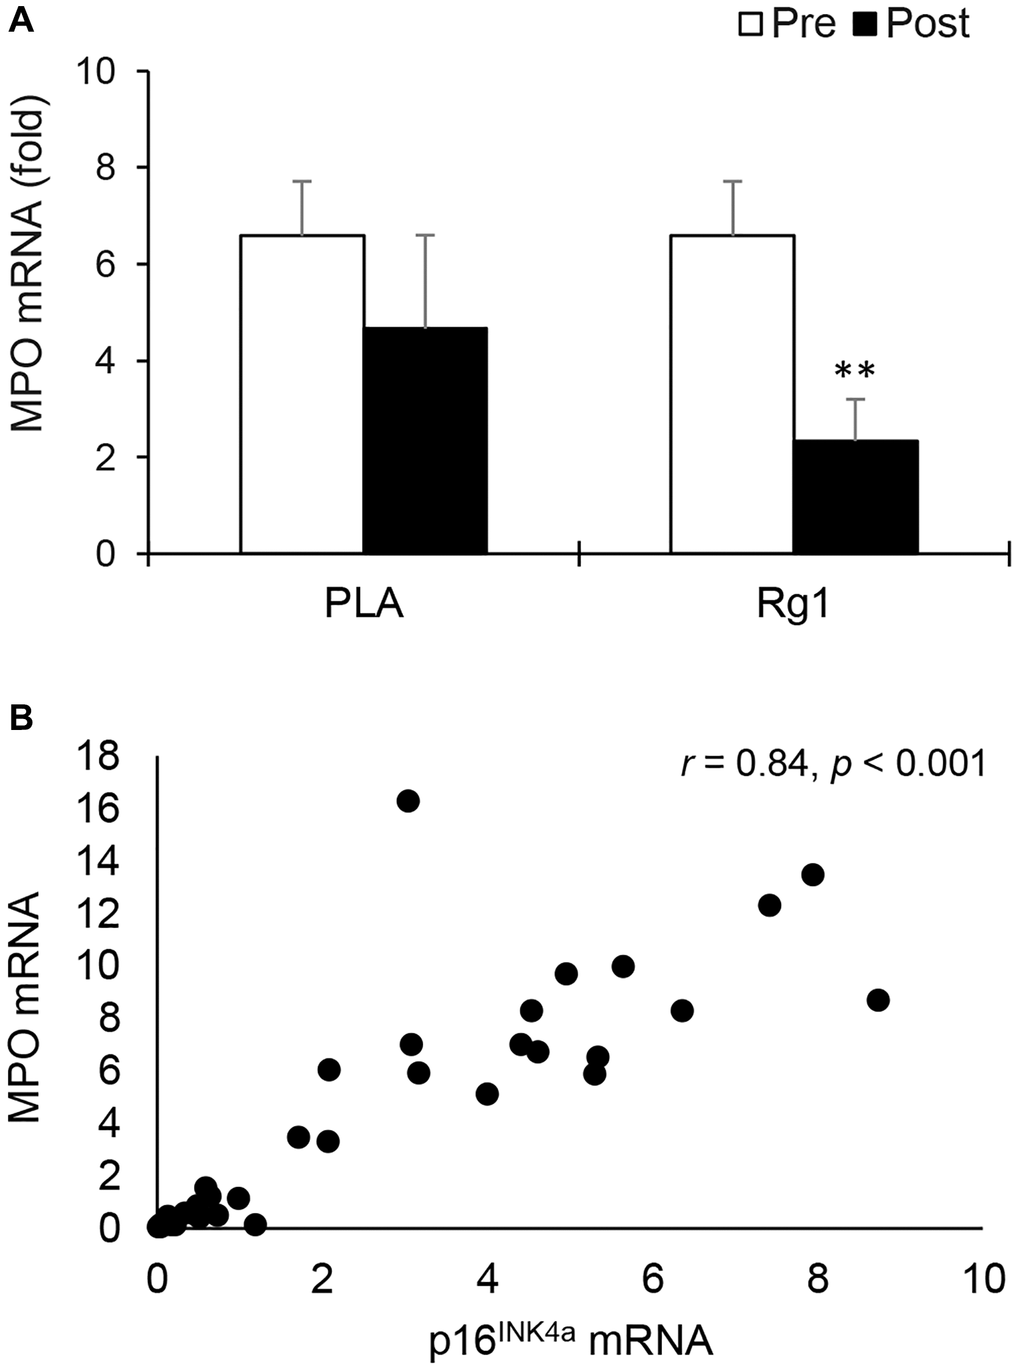 Myeloperoxidase mRNA in human skeletal muscle 24 h after squat exercise. Myeloperoxidase mRNA (neutrophil marker) decreased post exercise when immunostimulant Rg1 was supplemented 1 h before exercise (A). Myeloperoxidase mRNA is highly correlated with p16INK4a mRNA (B) In muscle tissues. **denotes significant difference against Pre, p 